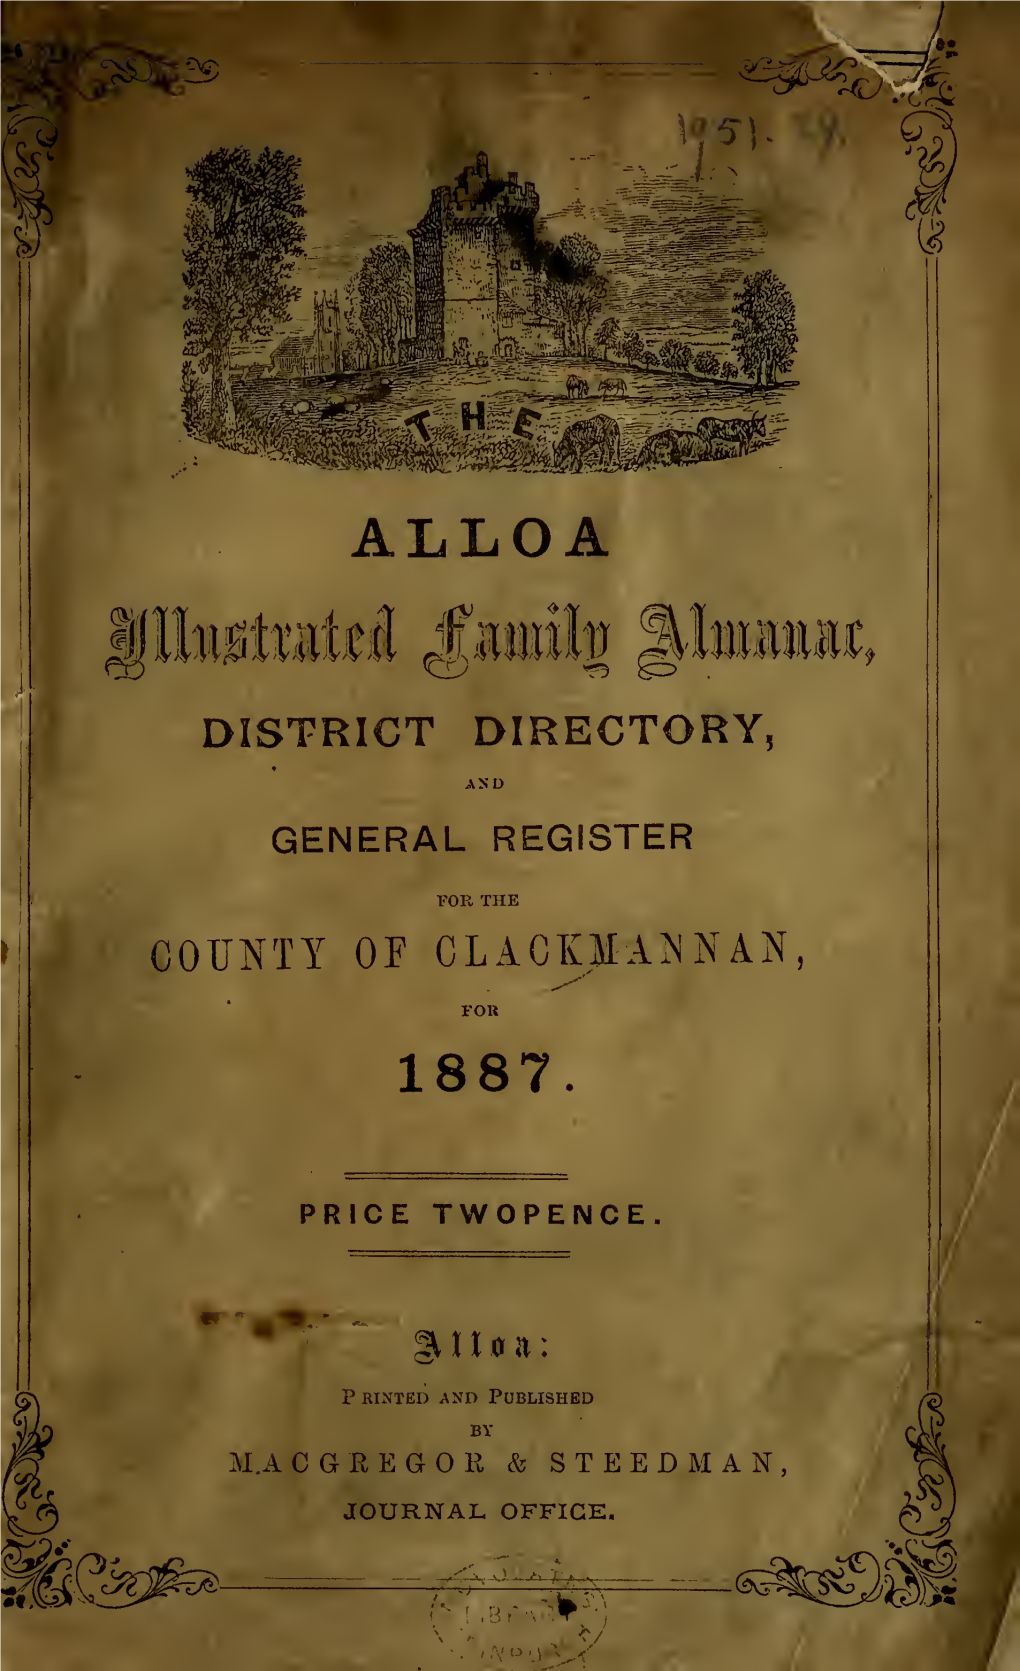 ALLOA M Fl DISTRICT DIRECTORY, and GENERAL REGISTER